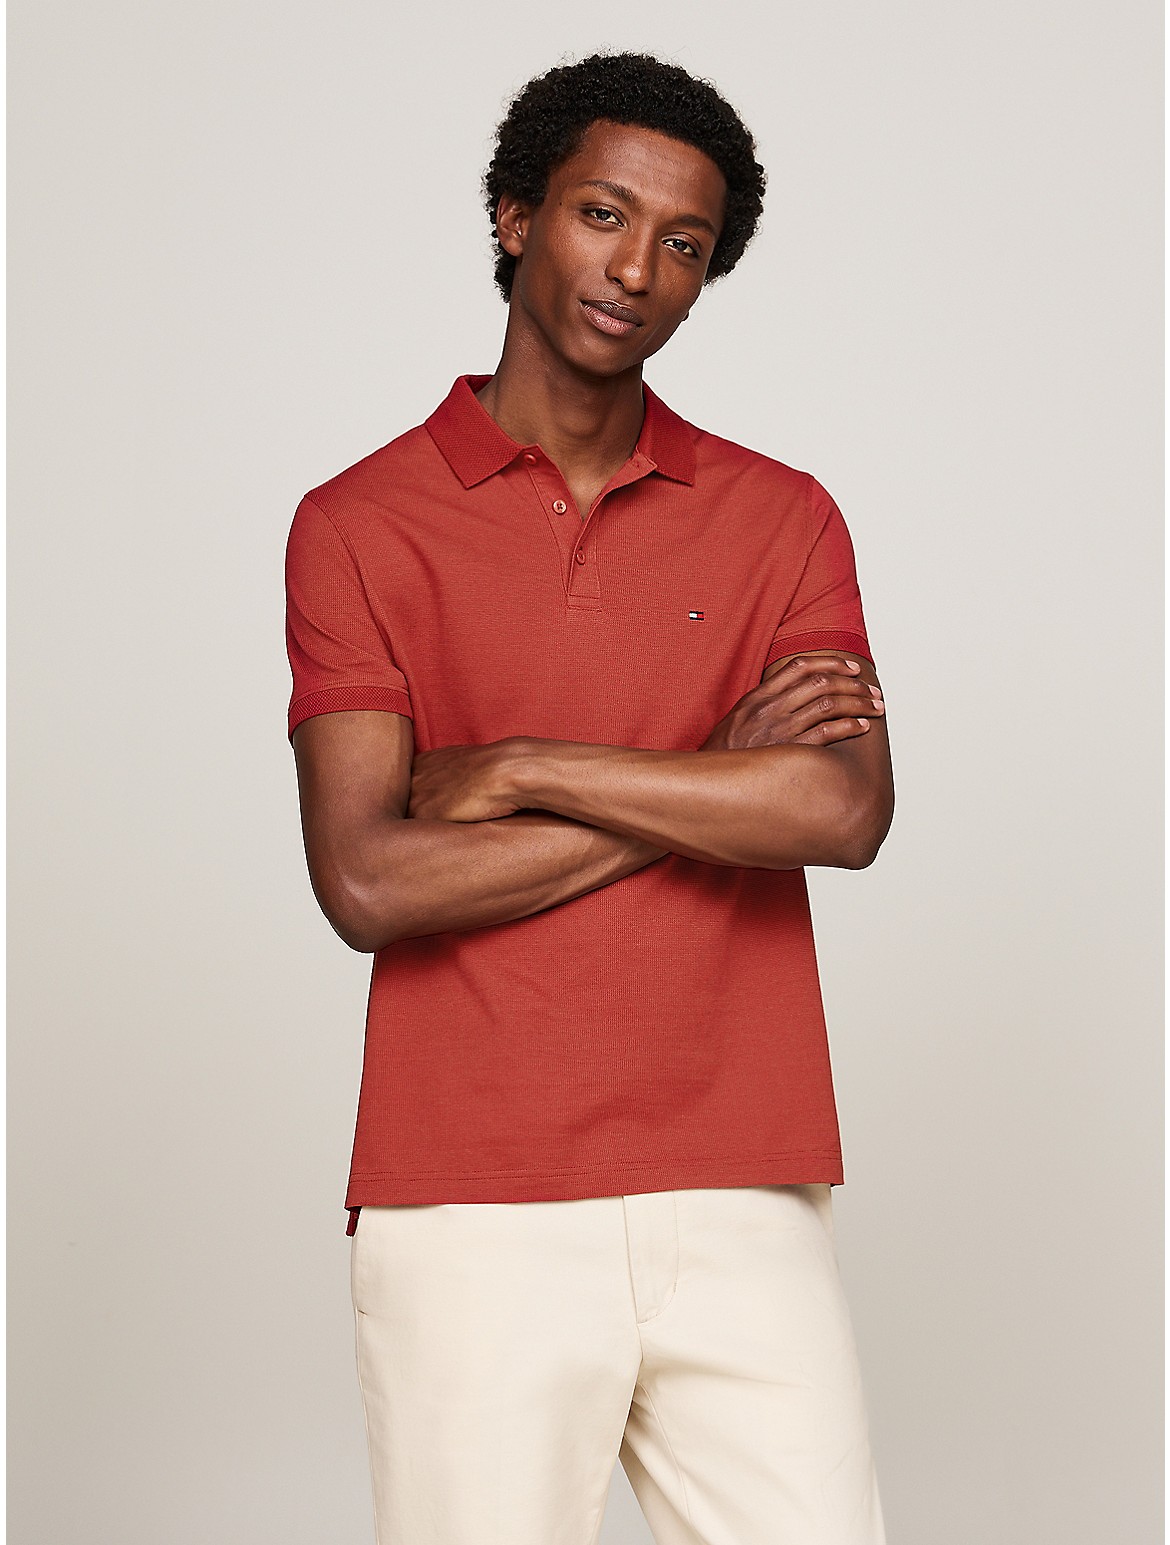 Tommy Hilfiger Men's Regular Fit Two-Tone Polo